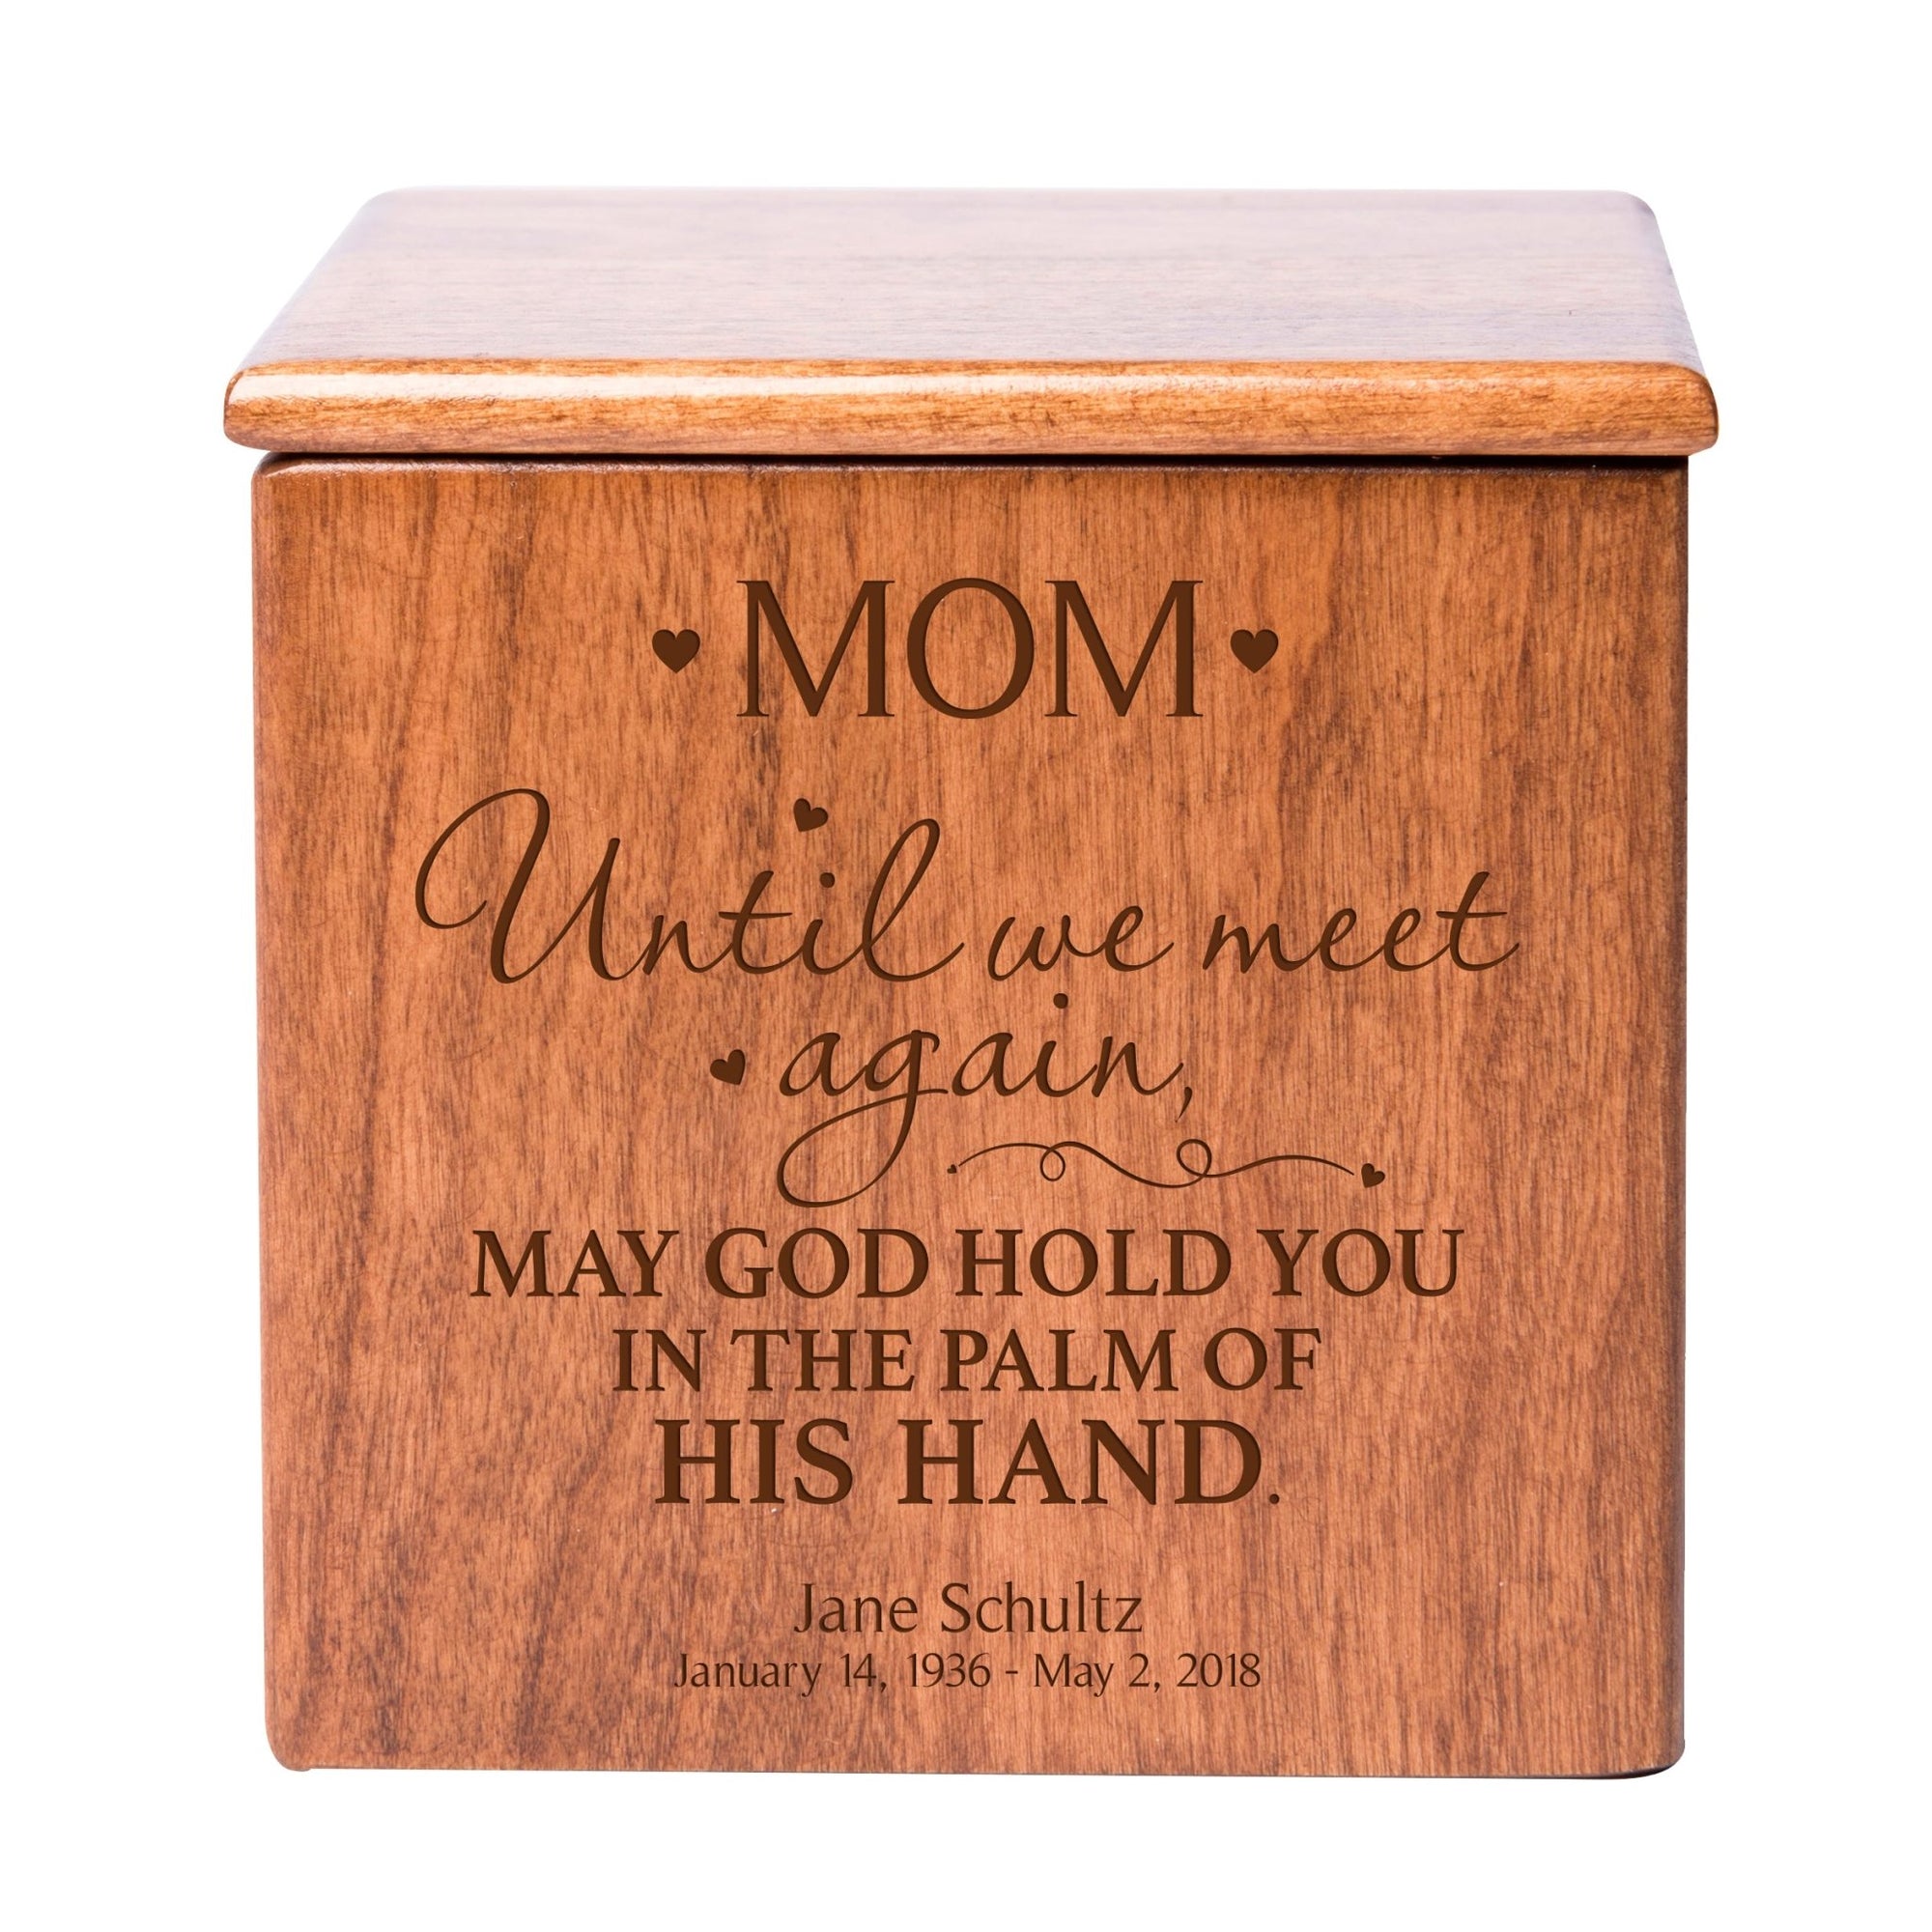 Custom Engraved Memorial 4.5x4.5in Cremation Urn Box Holds 49 Cu Inches Of Human Ashes (Until We Meet Again Mom) Funeral and Condolence Keepsake - LifeSong Milestones